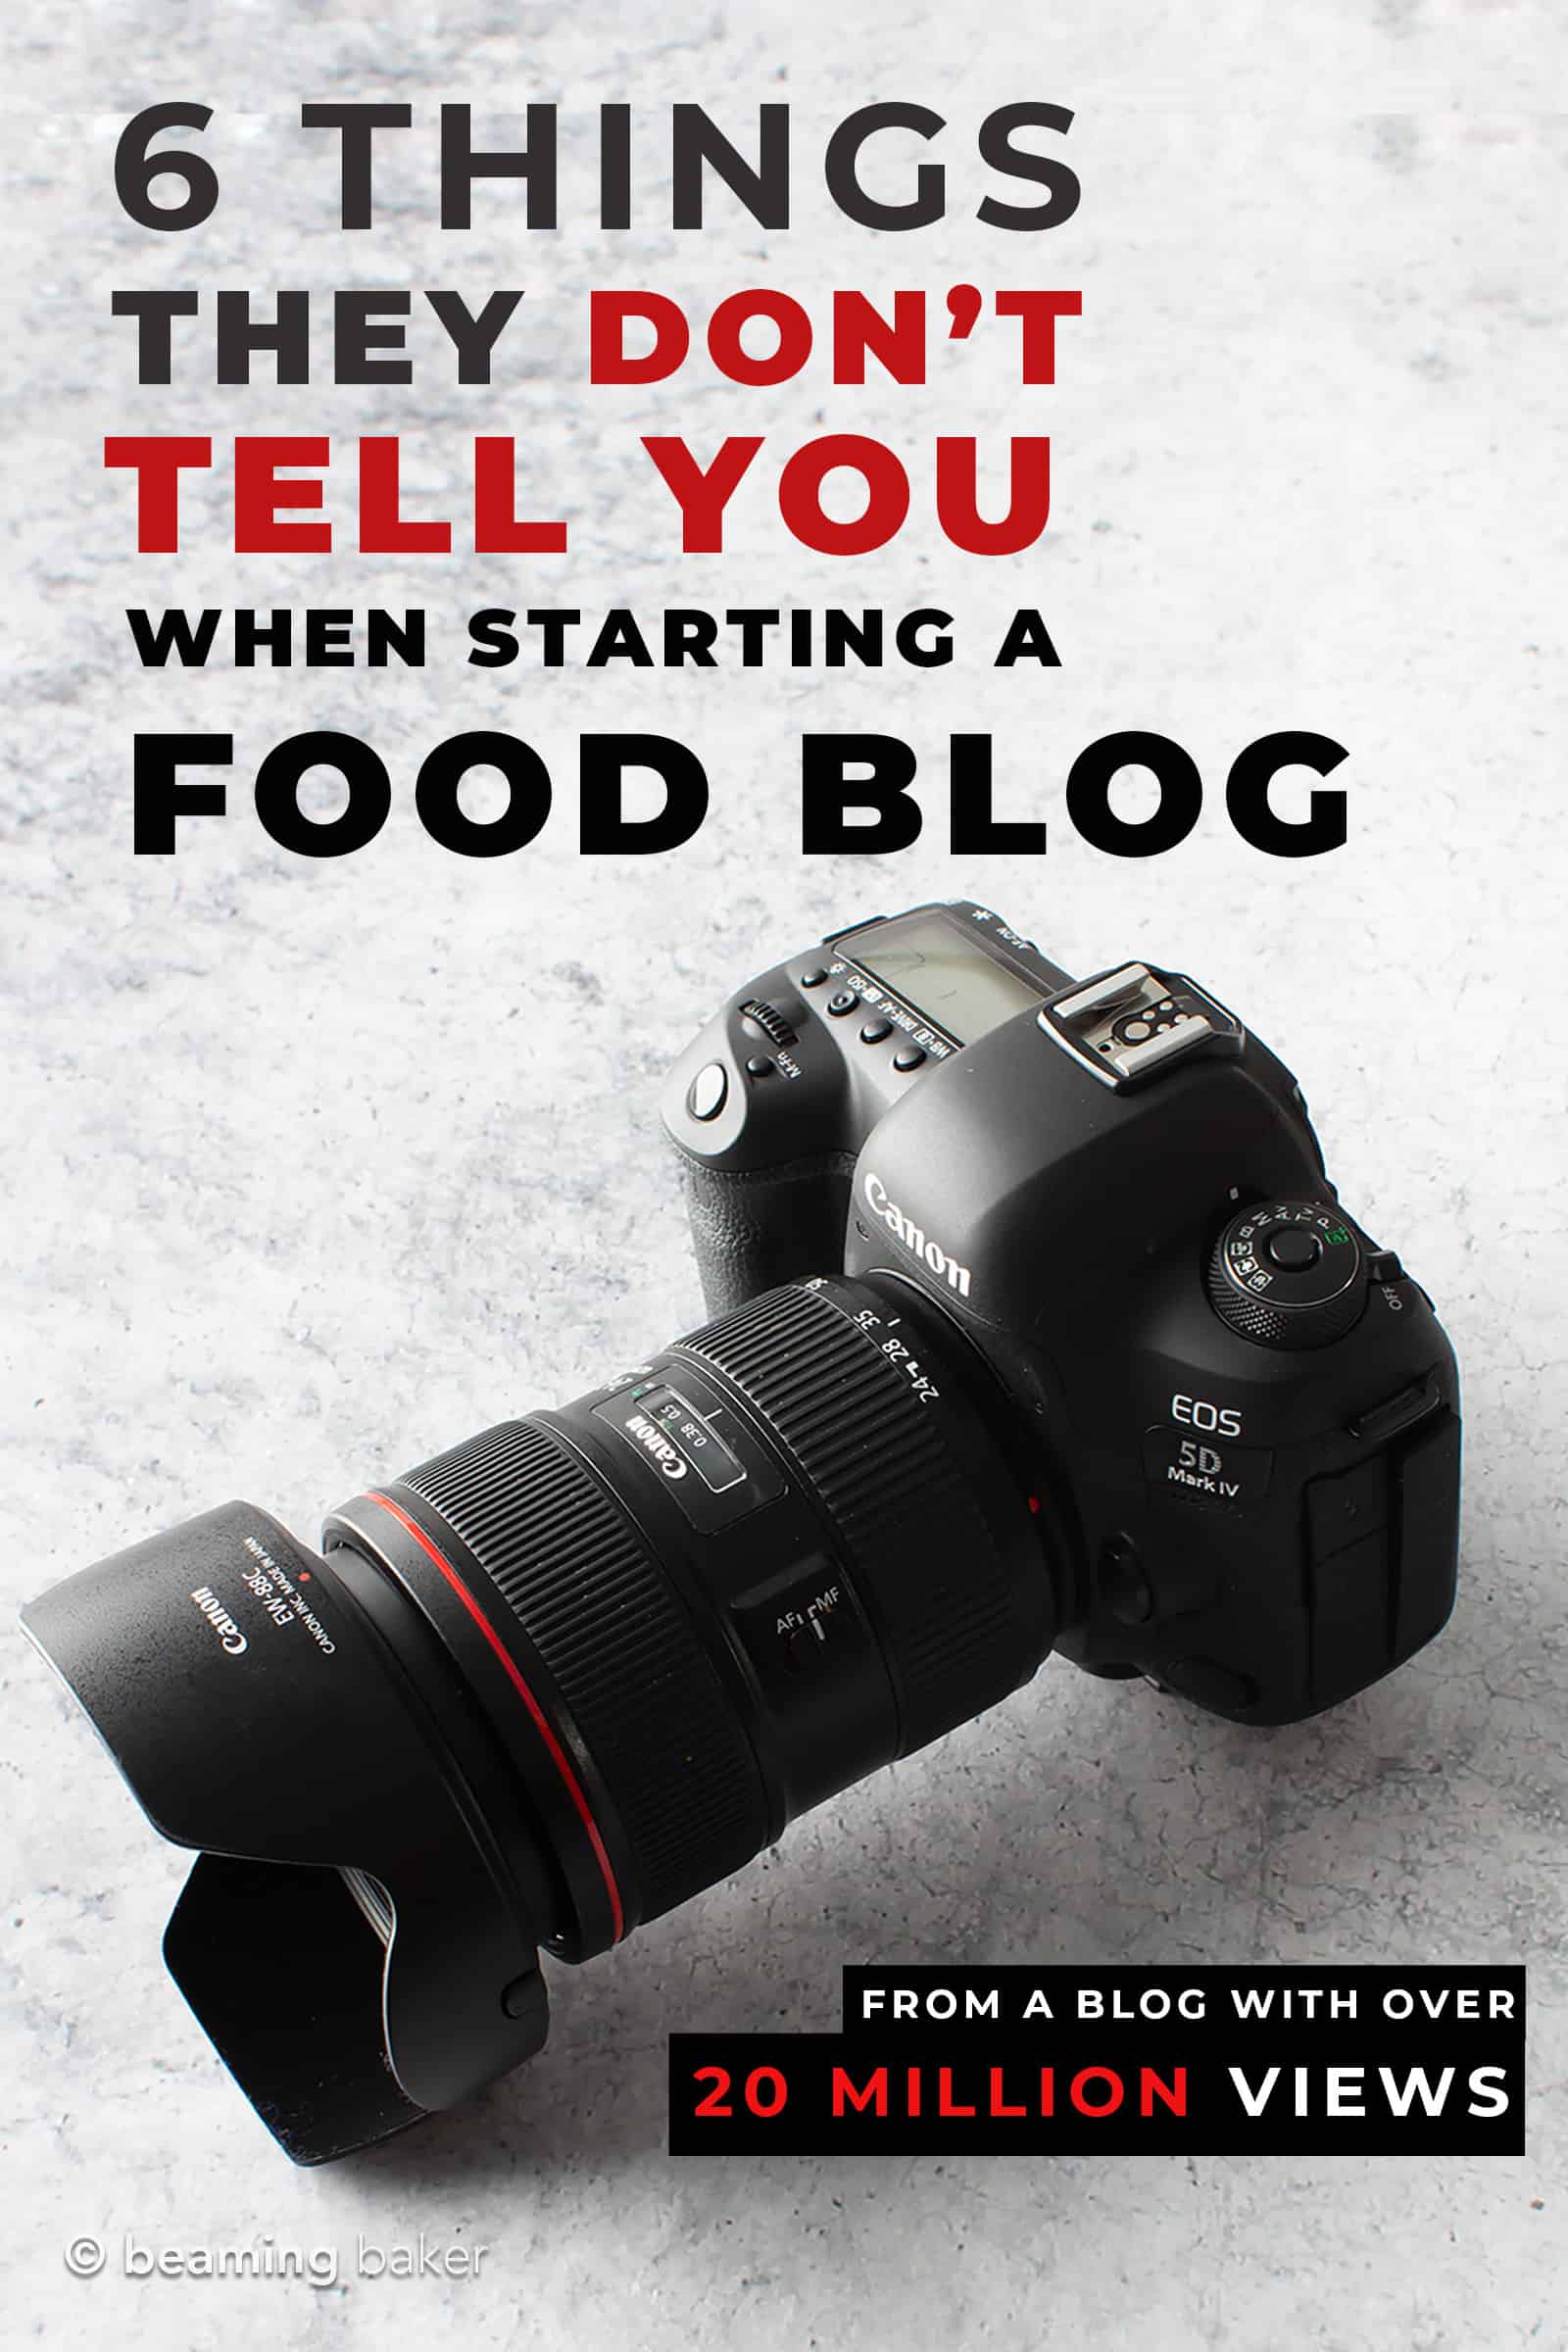 6 Things They Don’t Tell You When Starting a Food Blog: learn about the hard truths, honest life lessons, pitfalls and secrets to success for starting a food blog. From a blog with over 20 million views. #FoodBlog #Blogging #FoodBlogging | Post at BeamingBaker.com